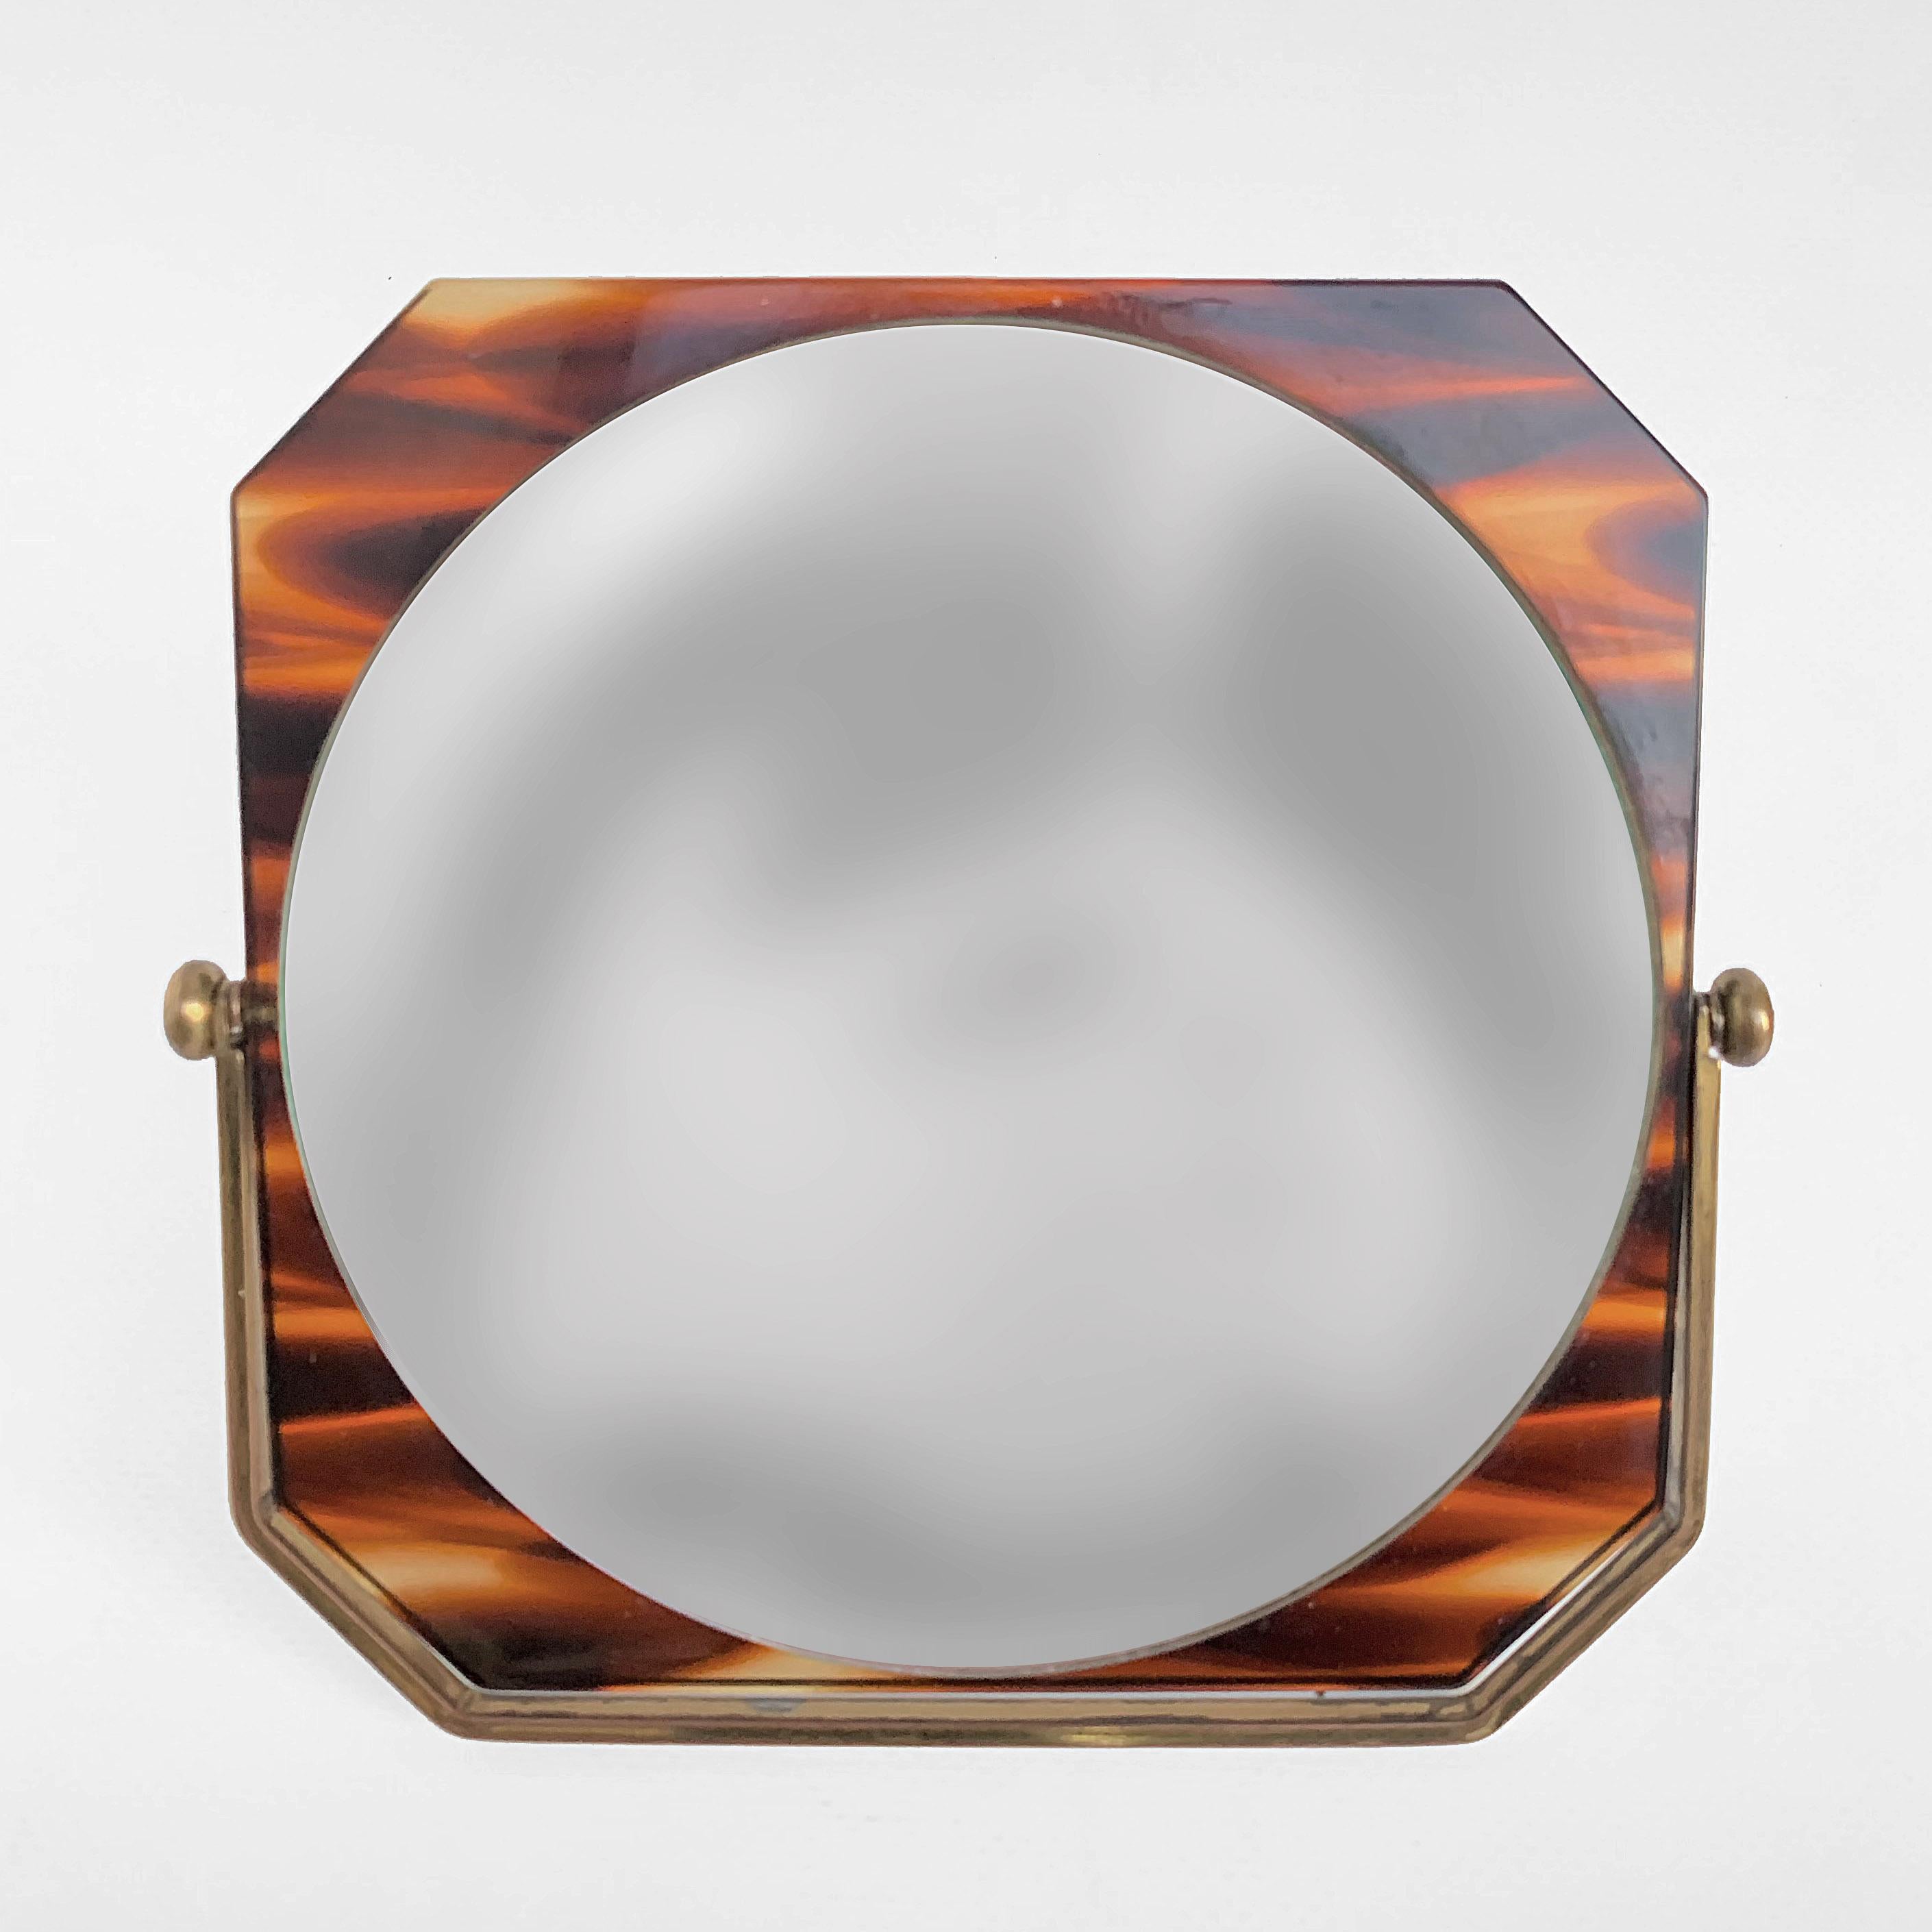 Italian Table Mirror, Brass and Tortoise Plexiglass, Double-Sided Vanity, Italy 1970s For Sale